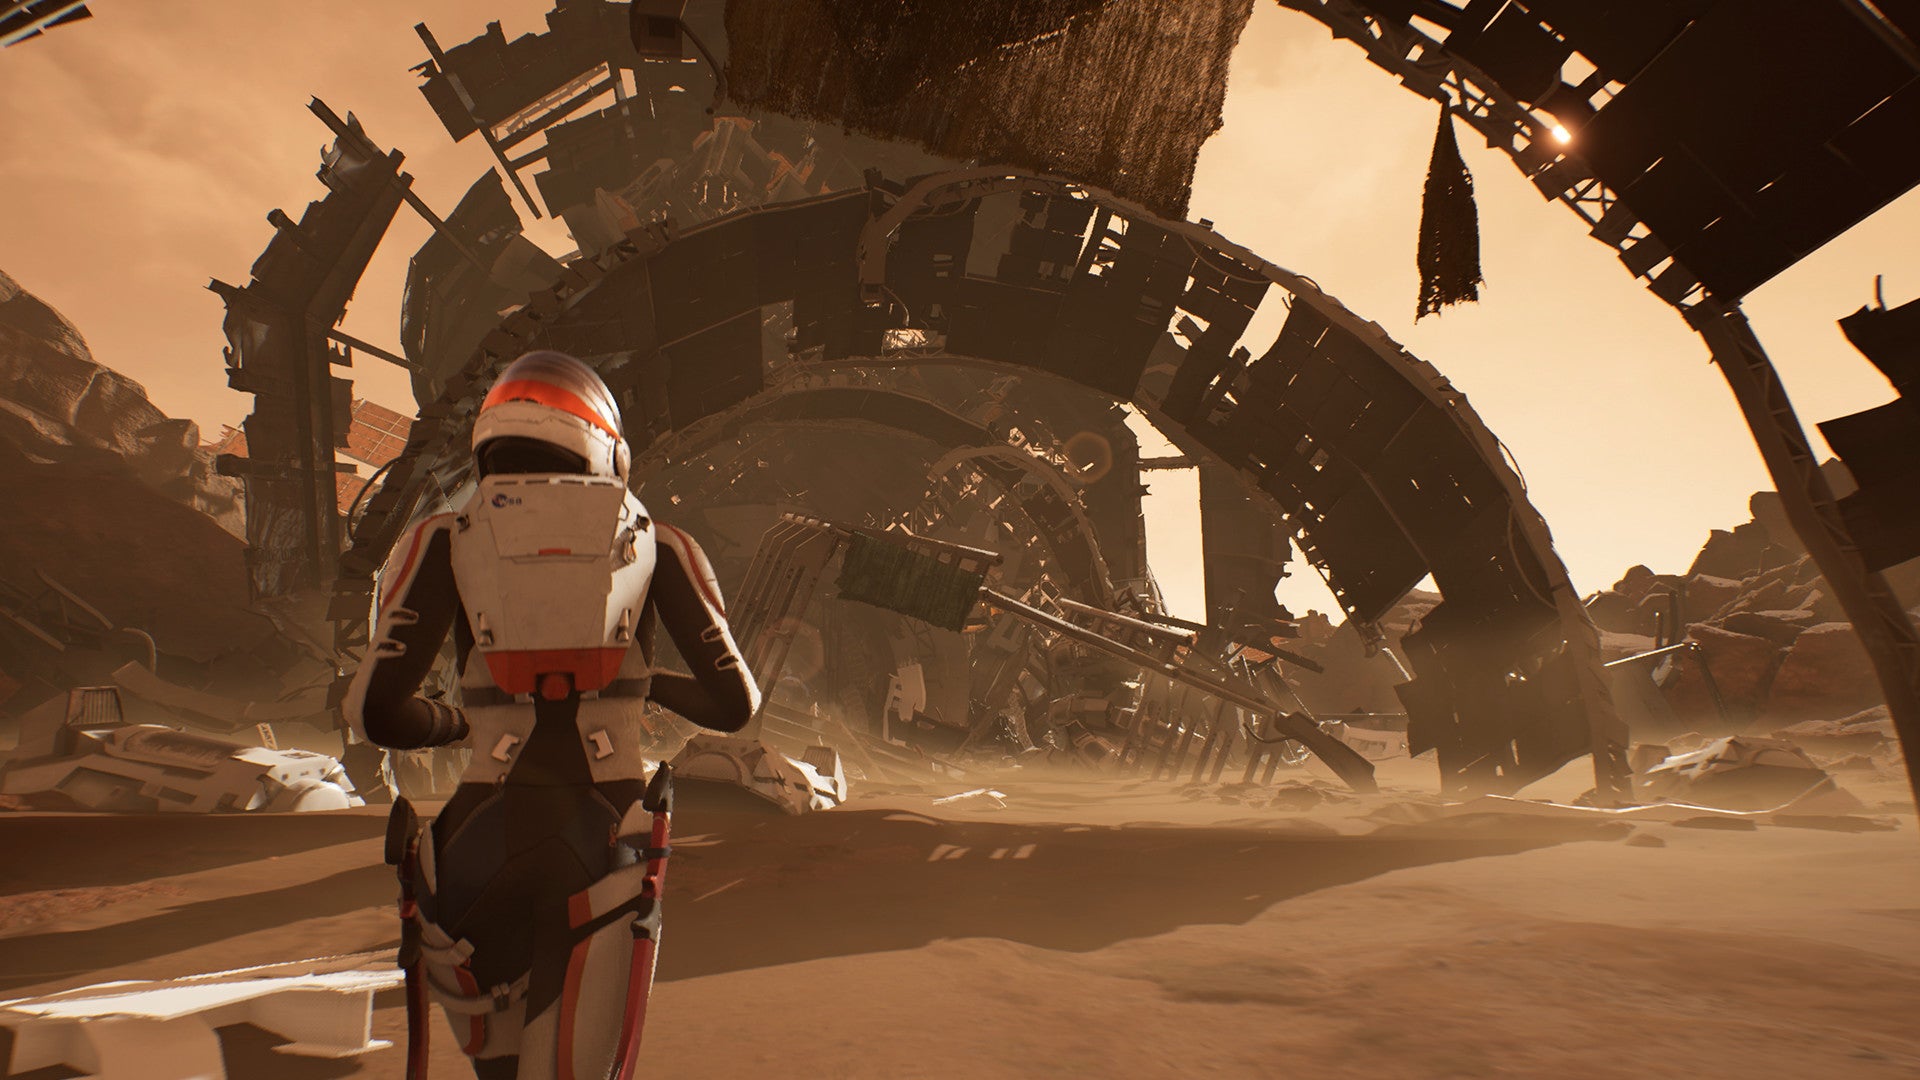 An astronaut runs into the belly of a ruined space ship in Deliver Us Mars